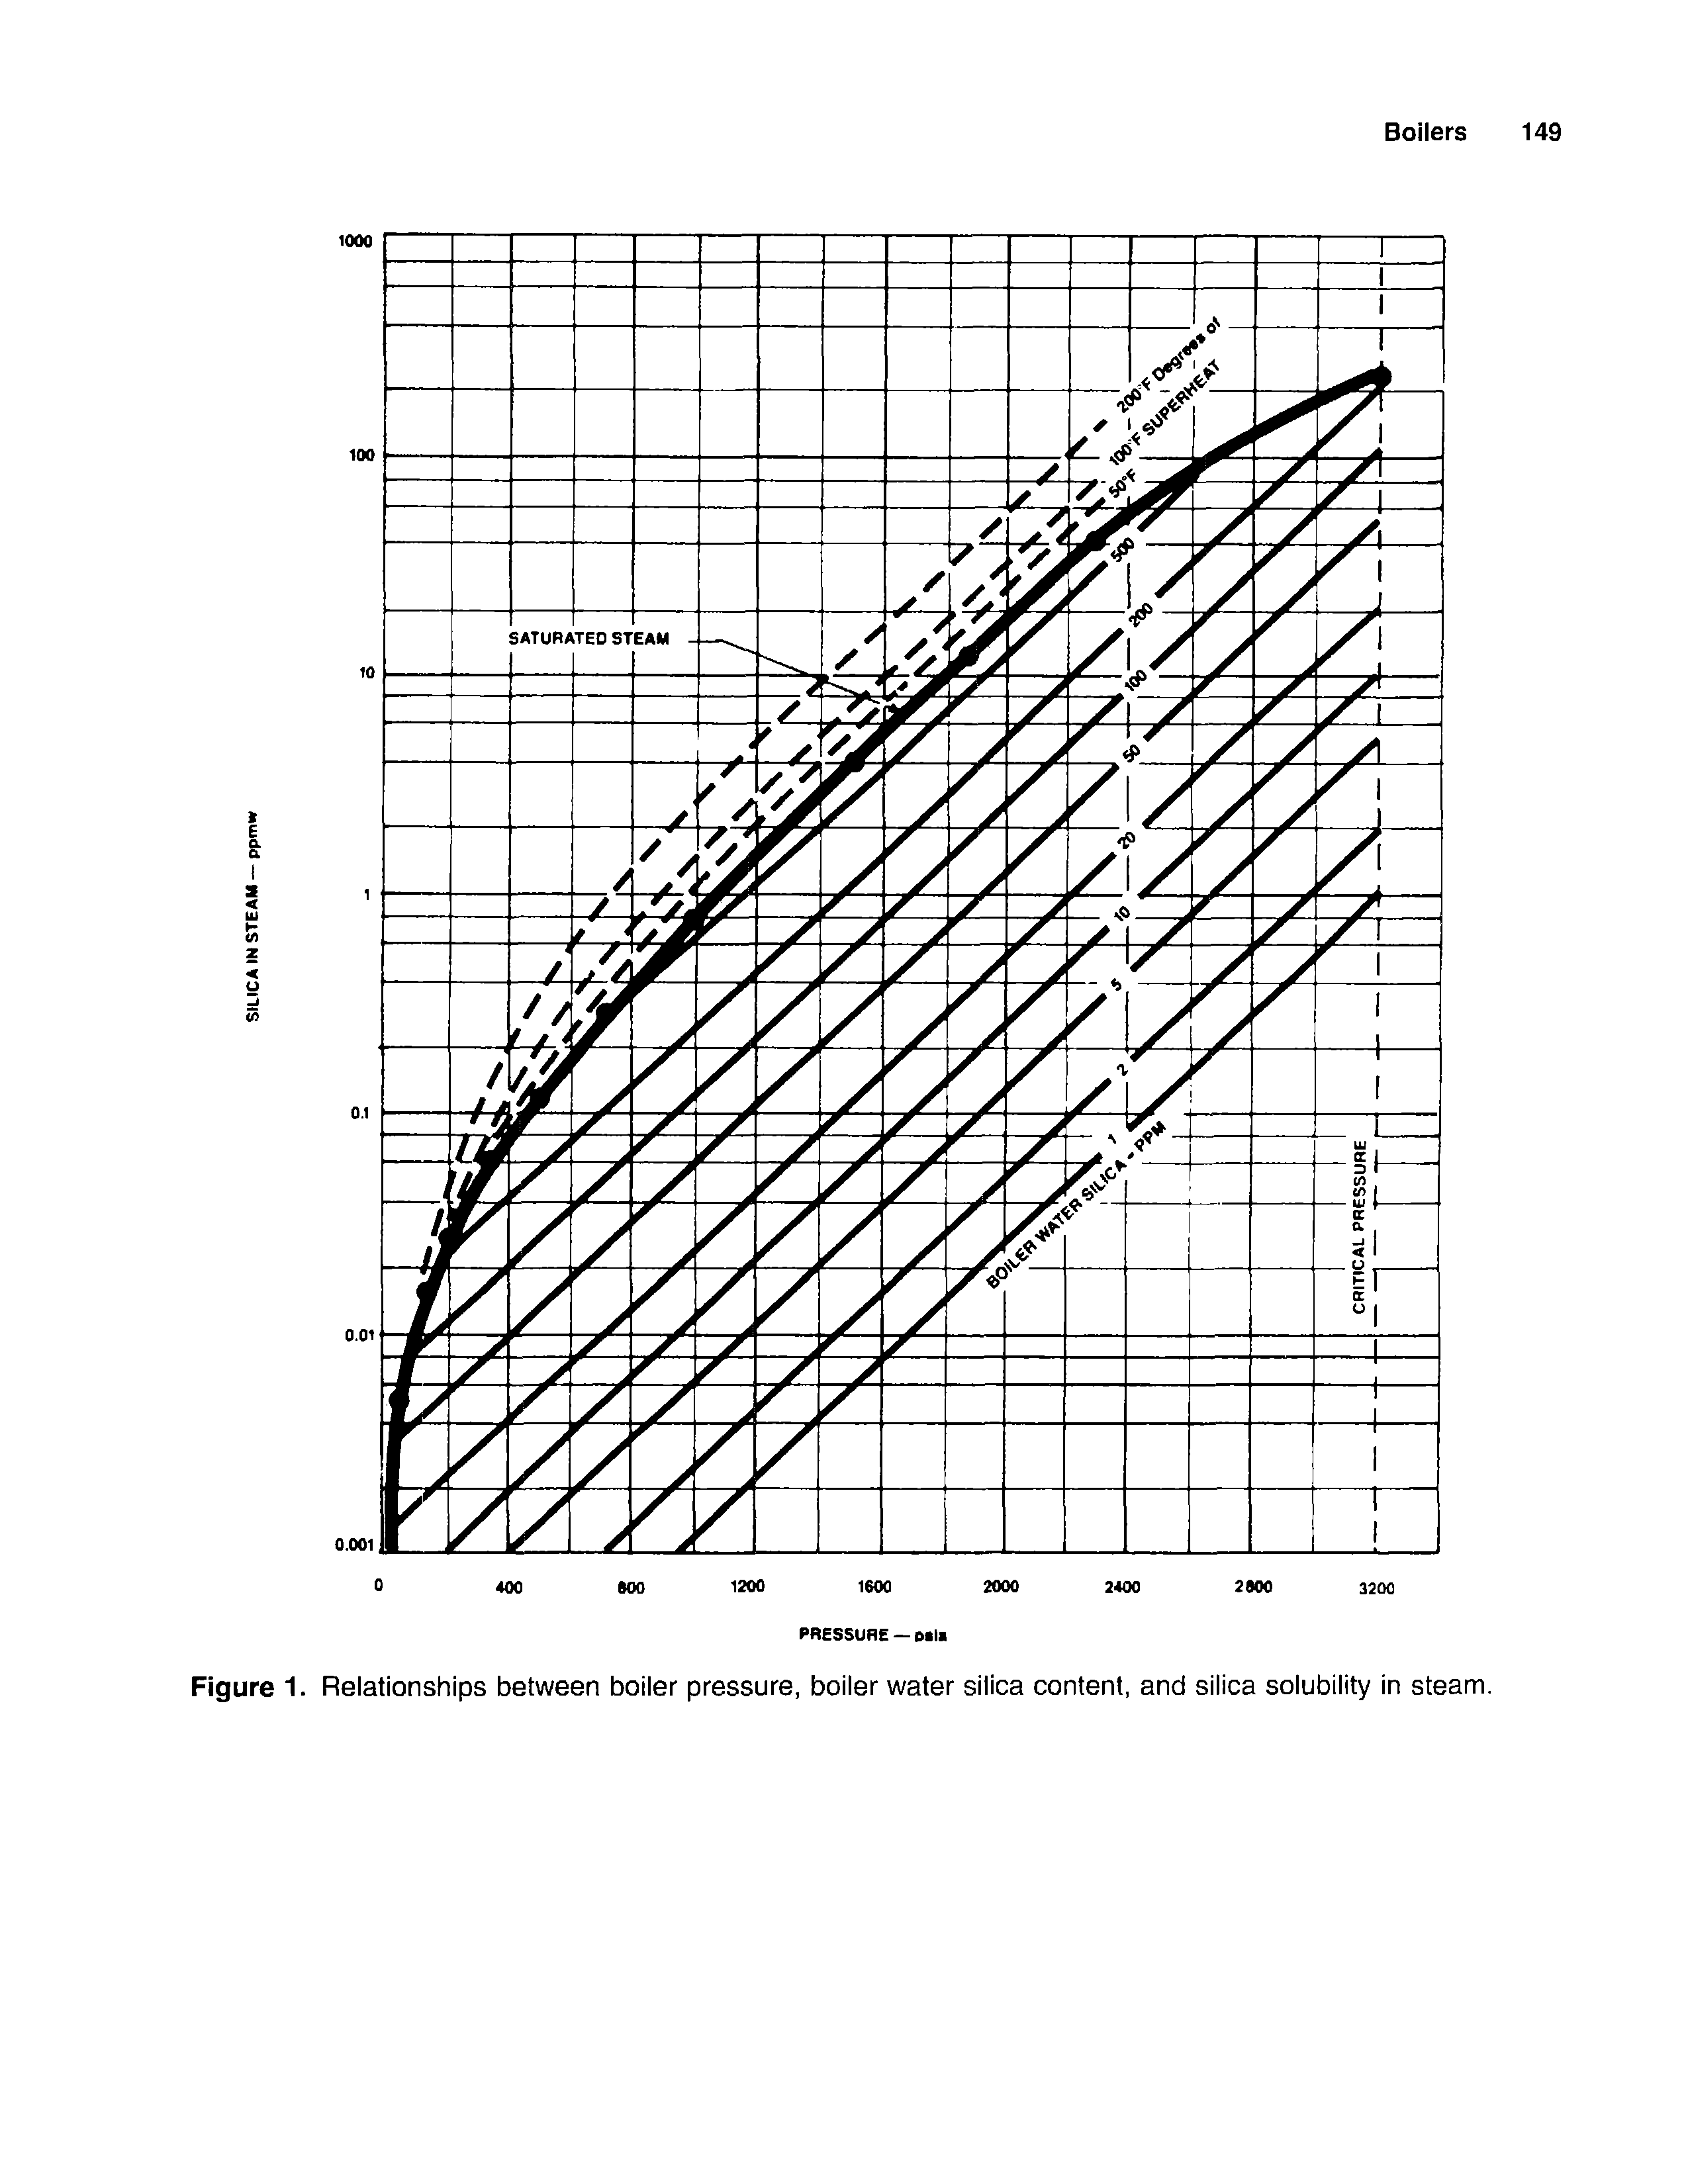 Figure 1. Relationships between boiler pressure, boiler water silica content, and silica solubility in steam.